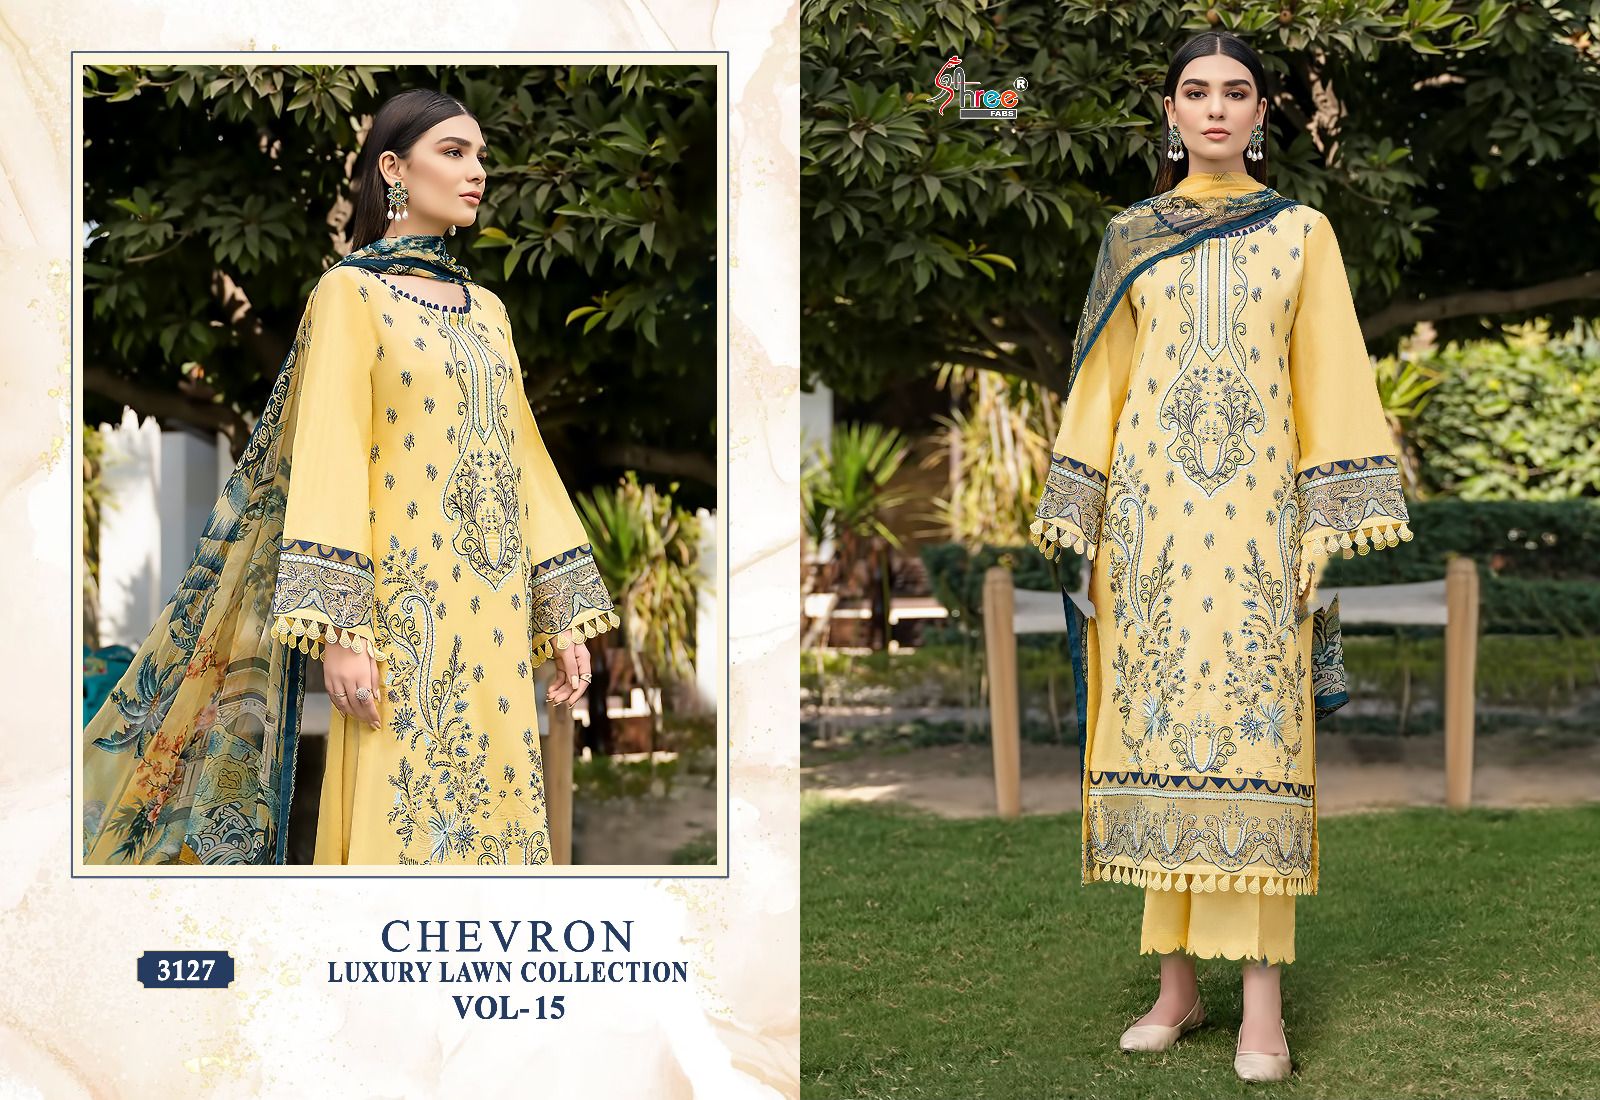 Shree Chevron Luxury Lawn Collection Vol 15 collection 6